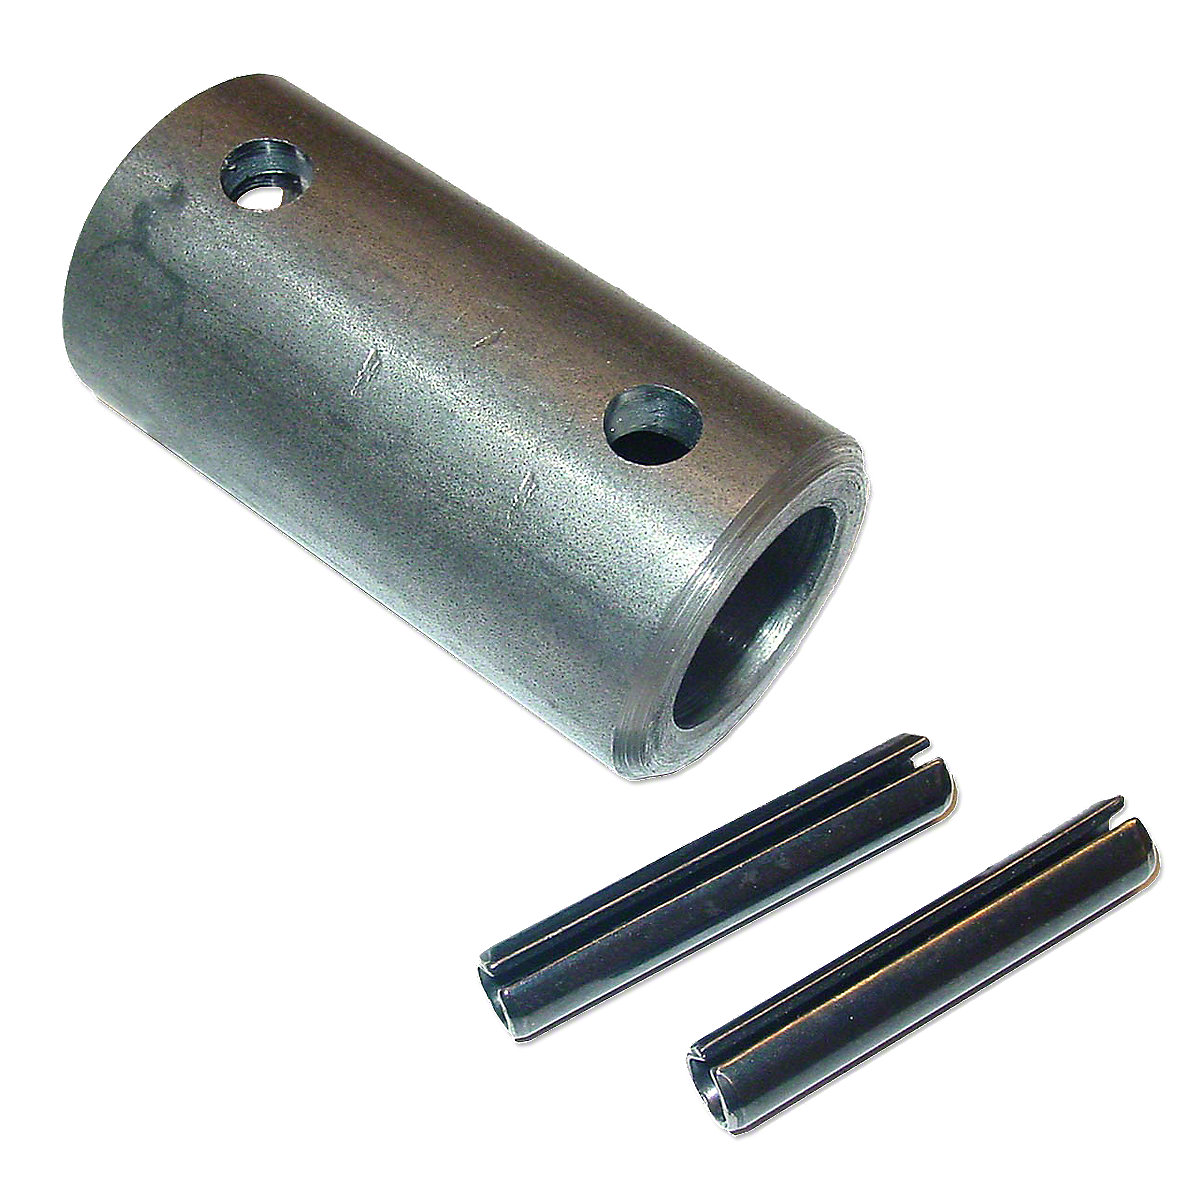 Use only if you have a universal joint at one end of existing steering shaft -- 2-5/8 overall length.
Fits various models